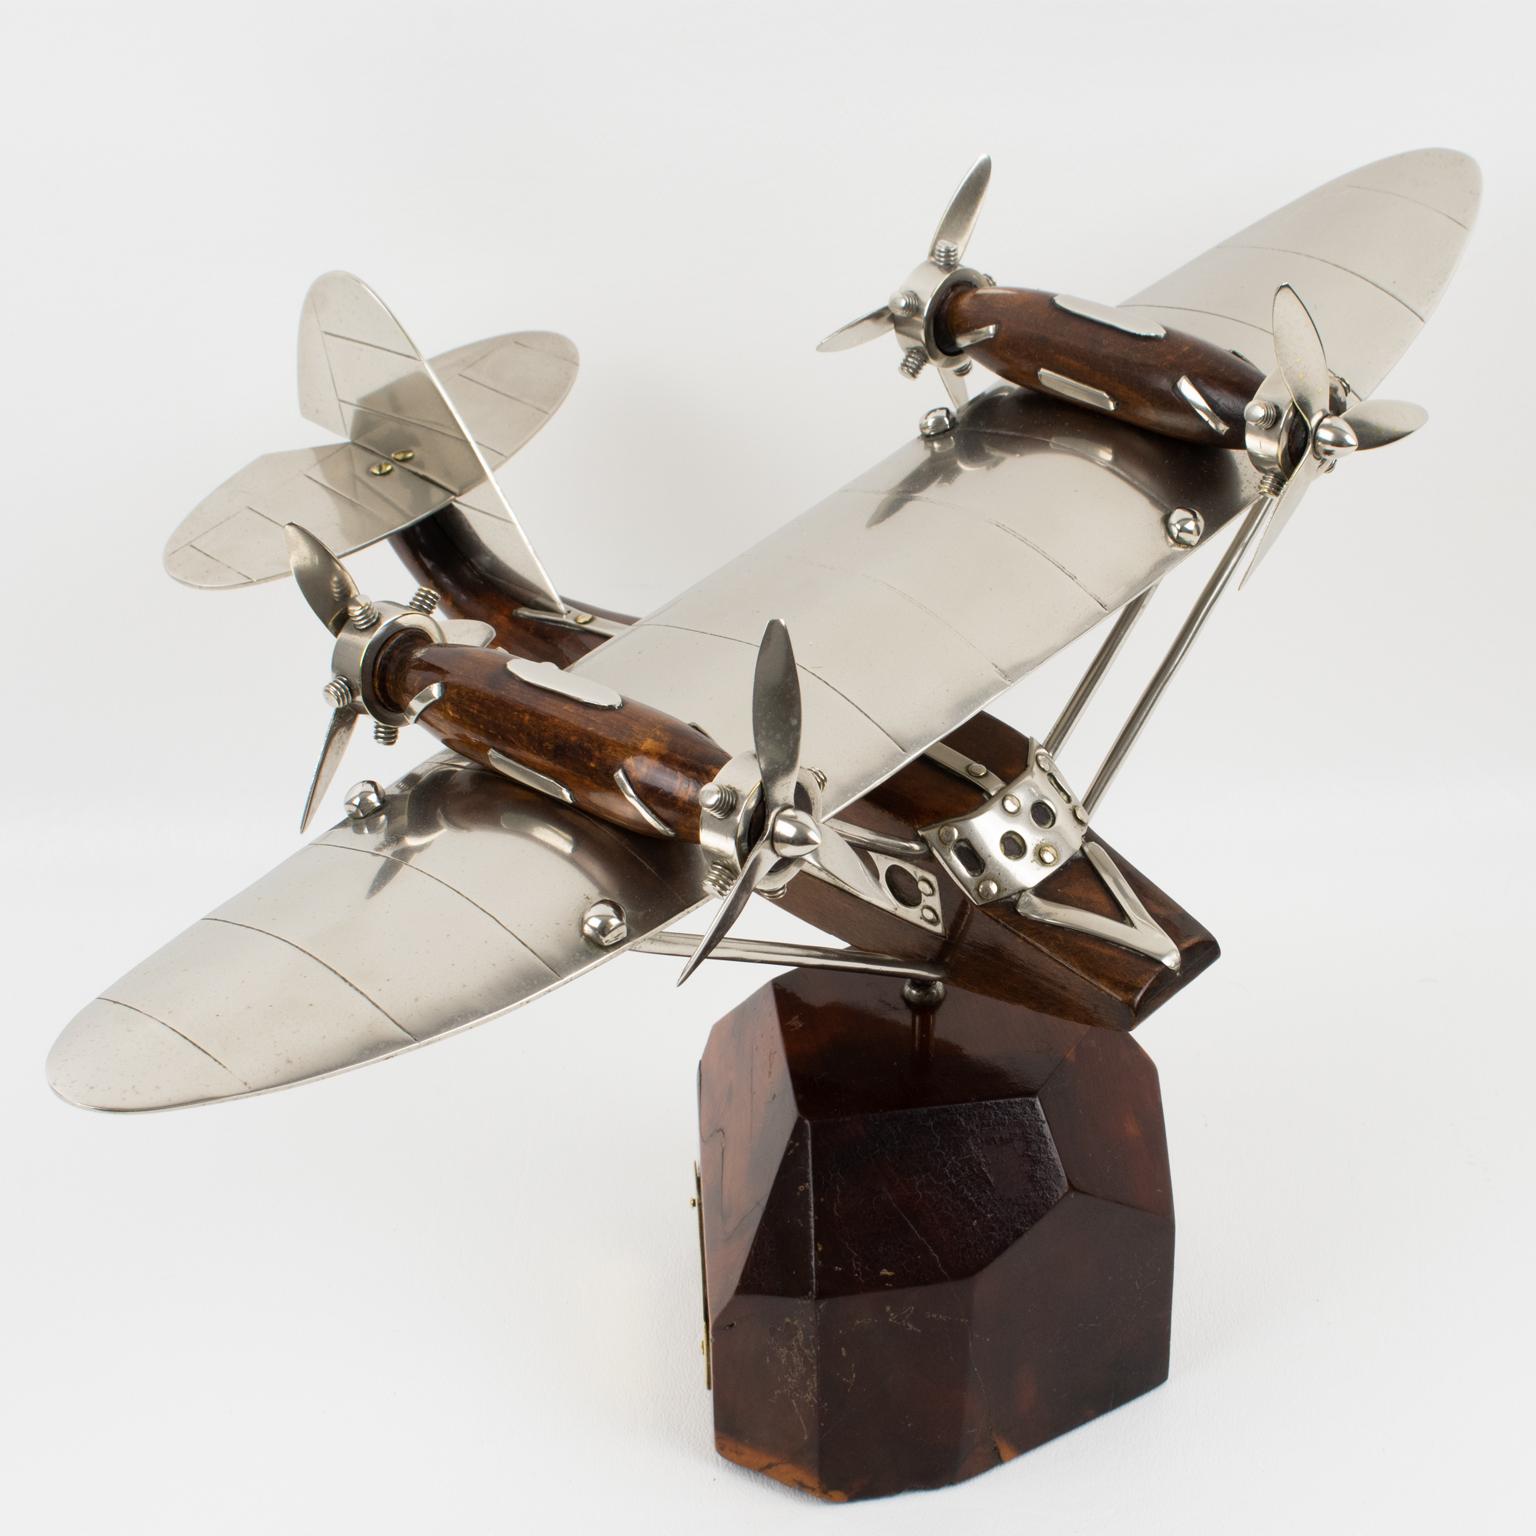 A fantastic French Art Deco chrome and wood airplane/seaplane model mounted on a stylized wood plinth. A superbly crafted rendering of the legendary quadri-propellers seaplane, strikingly evocative of a golden age in air travel. This handsome 1940s